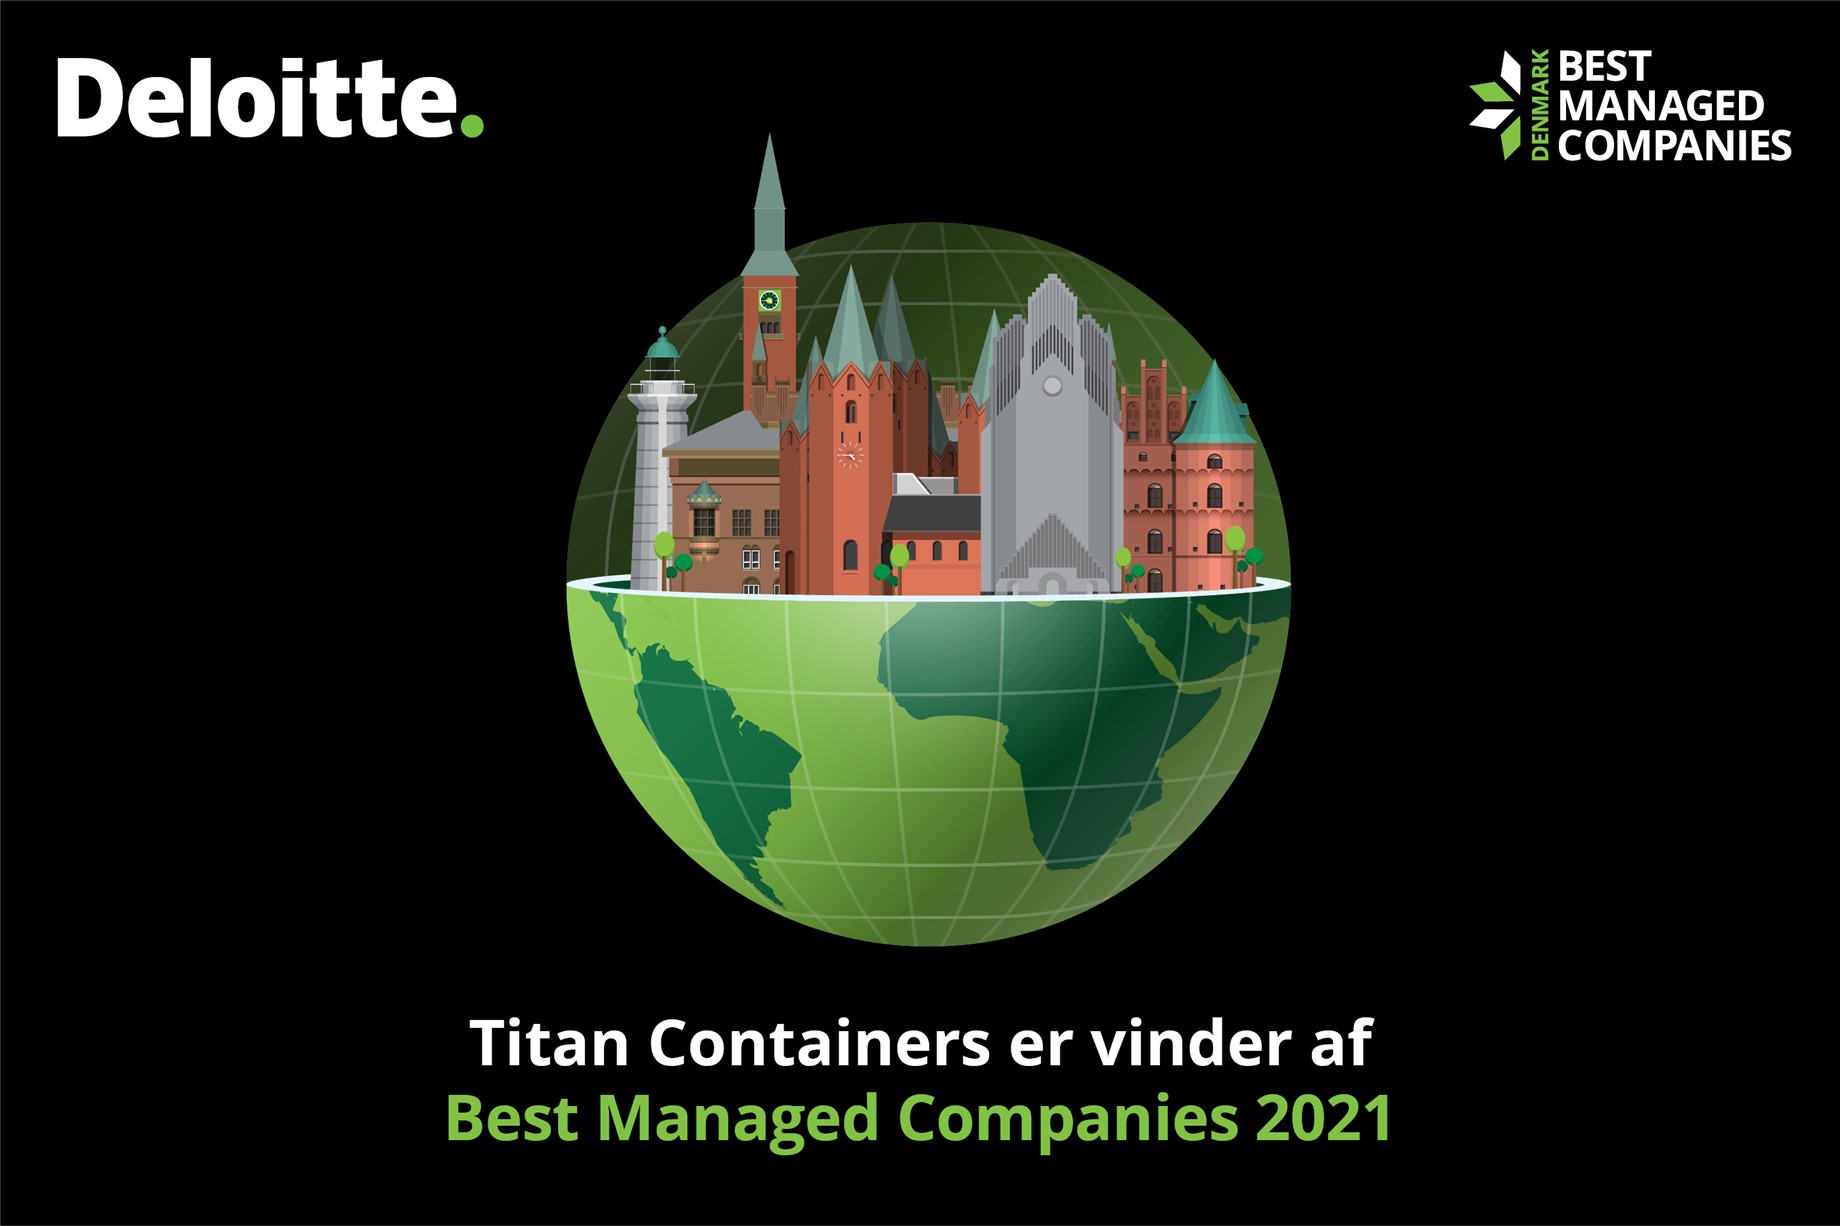 TITAN Containers vindere af Best Managed Companies 2021